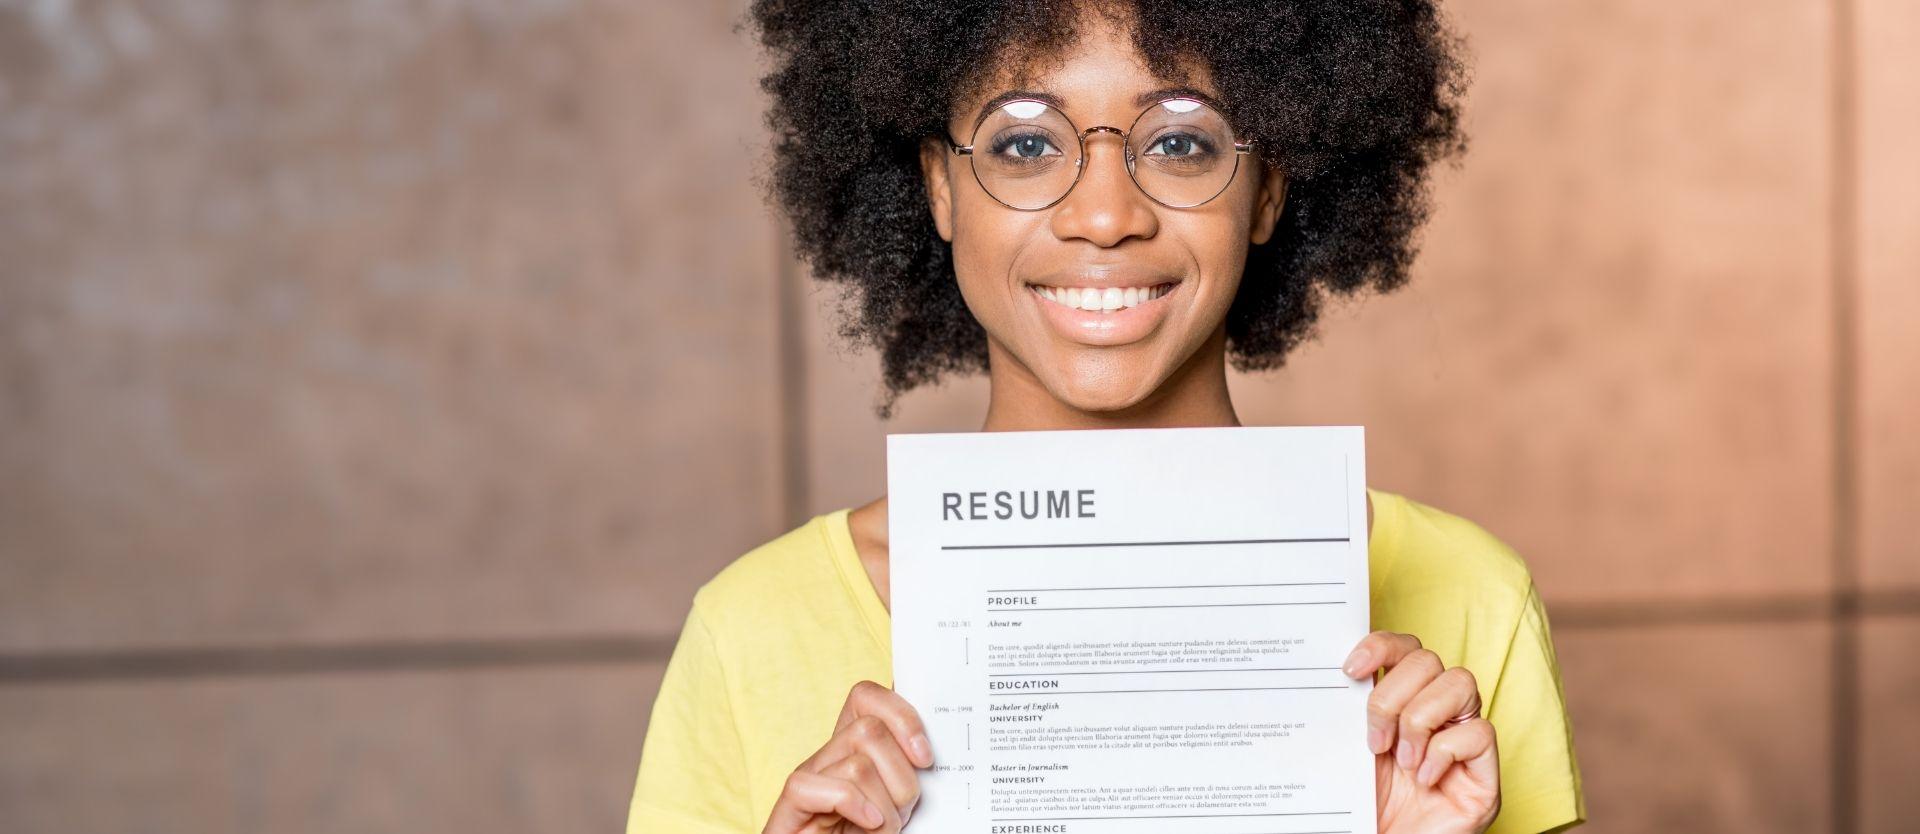 Is Your Resume Ready for 2021?